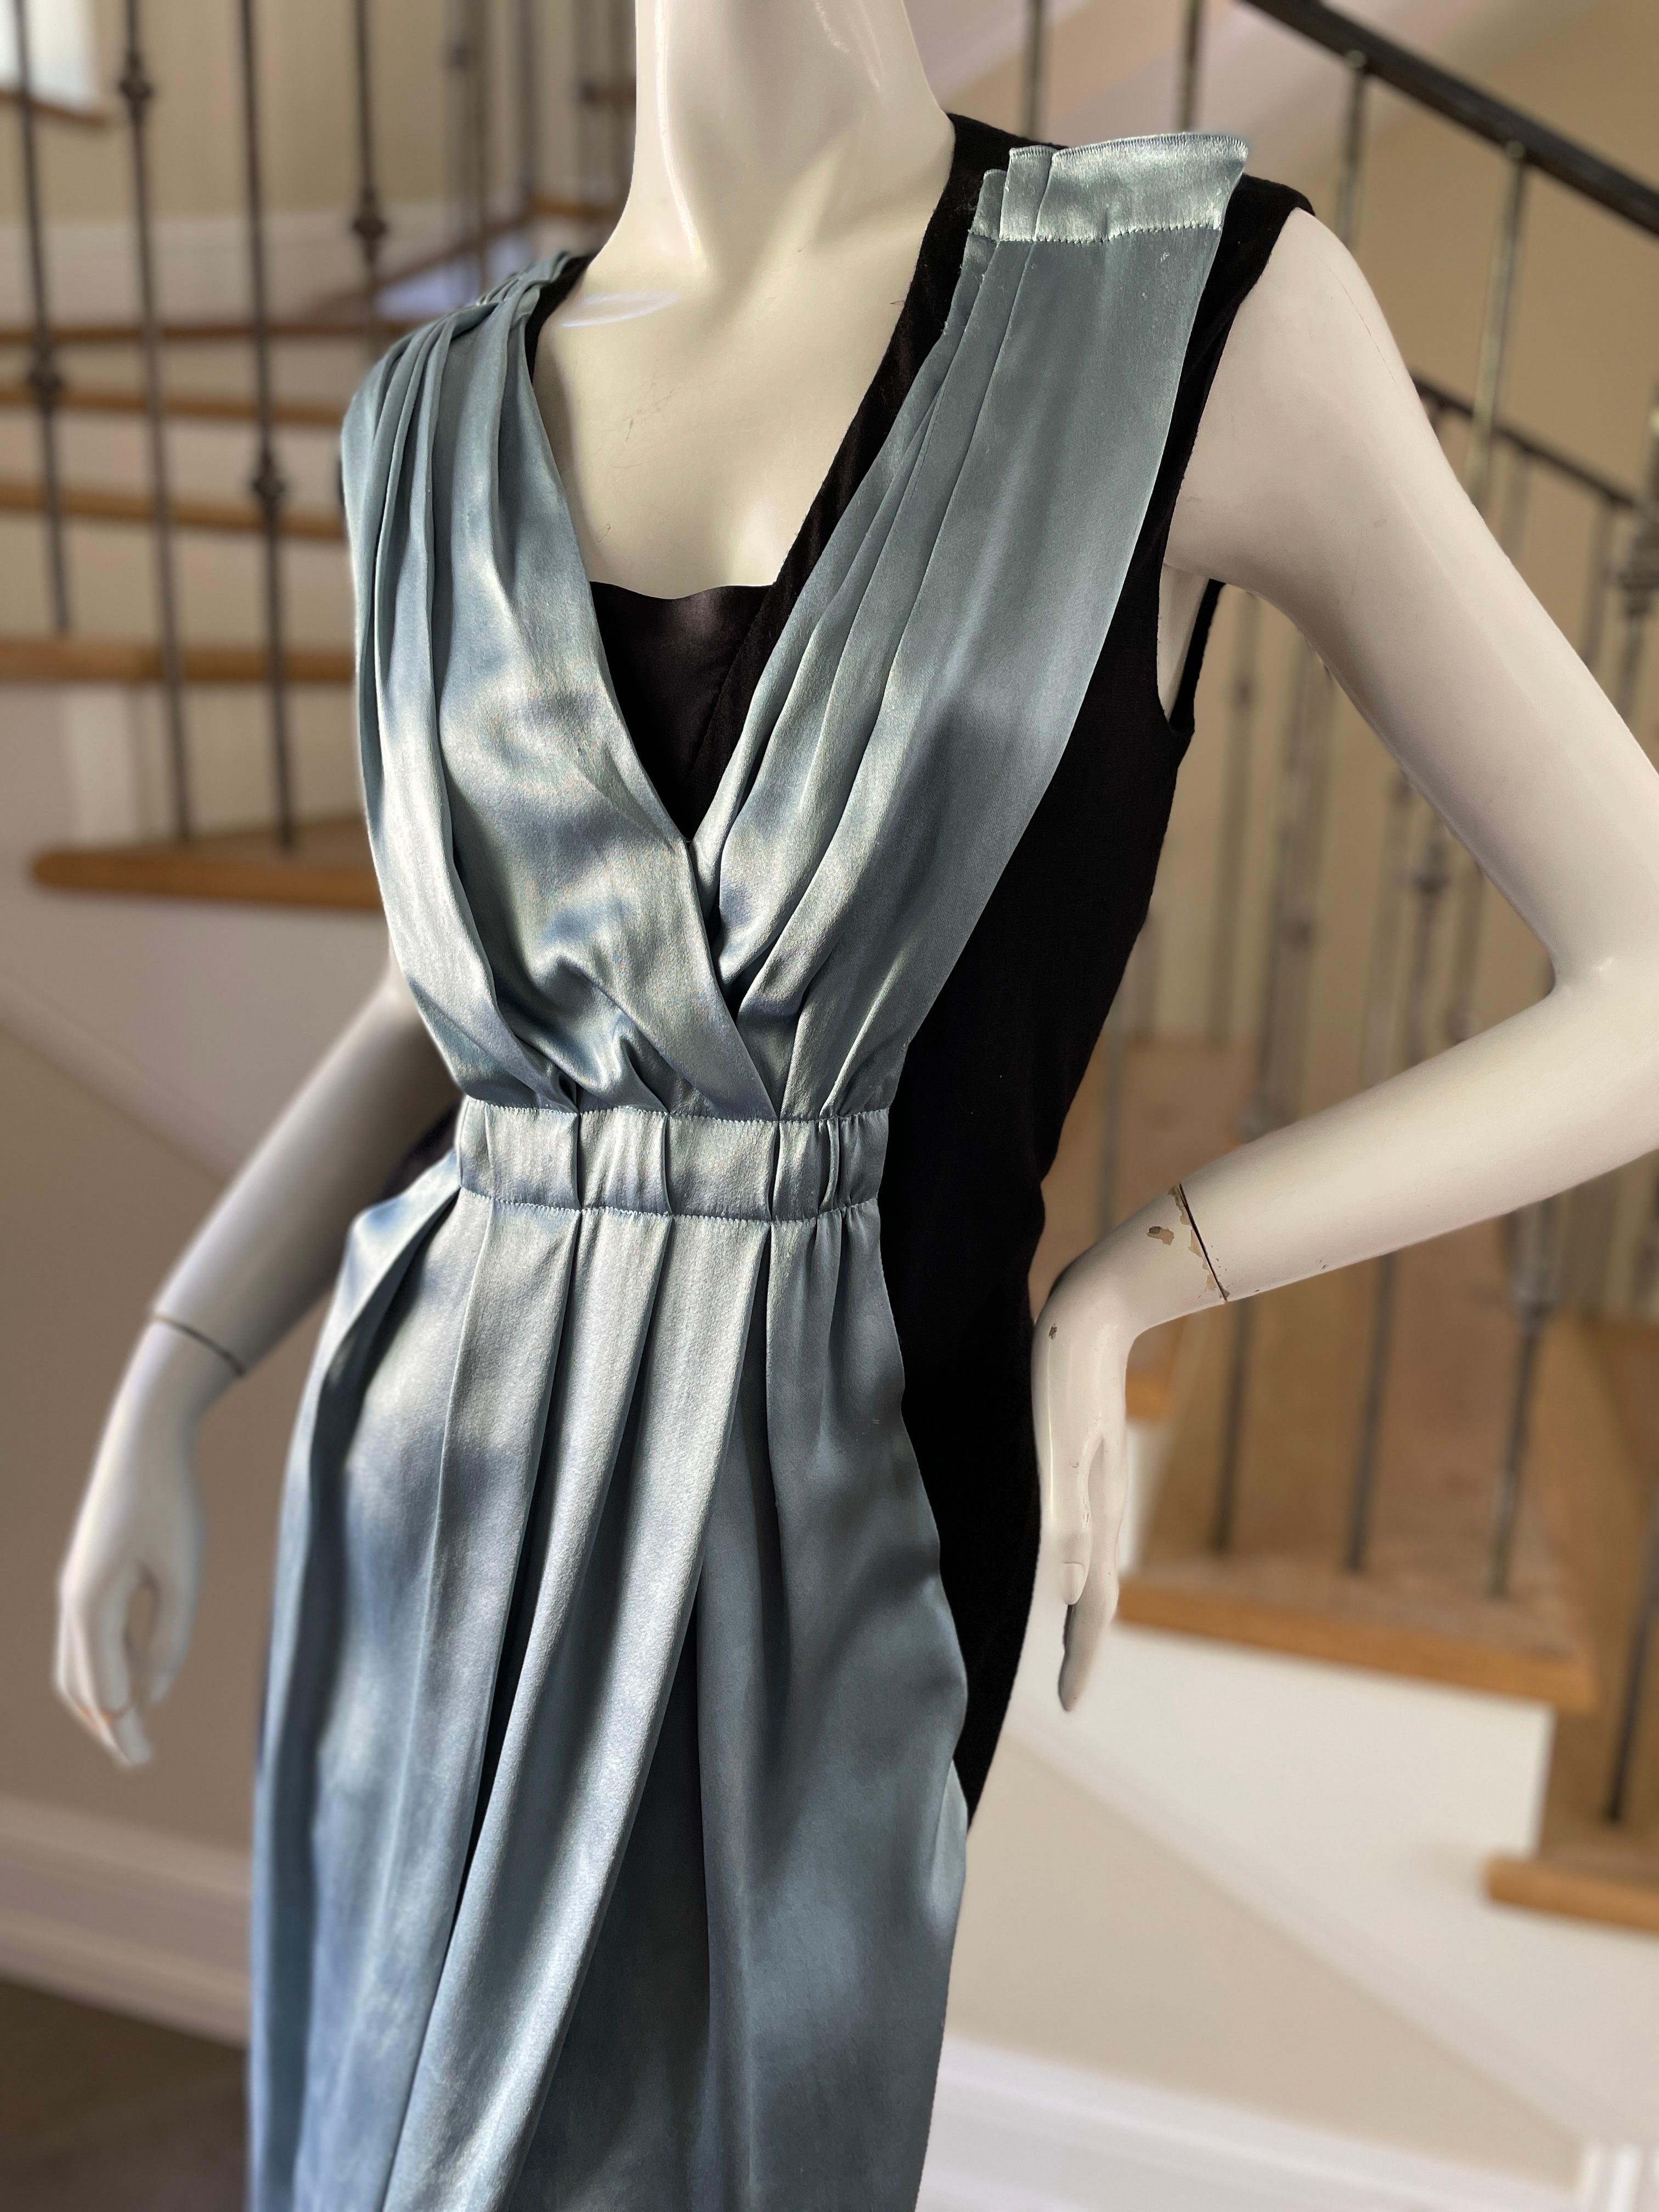 Women's Lanvin by Alber Elbaz Black Dress with Blue Silk Overlay from Fall 2006 For Sale